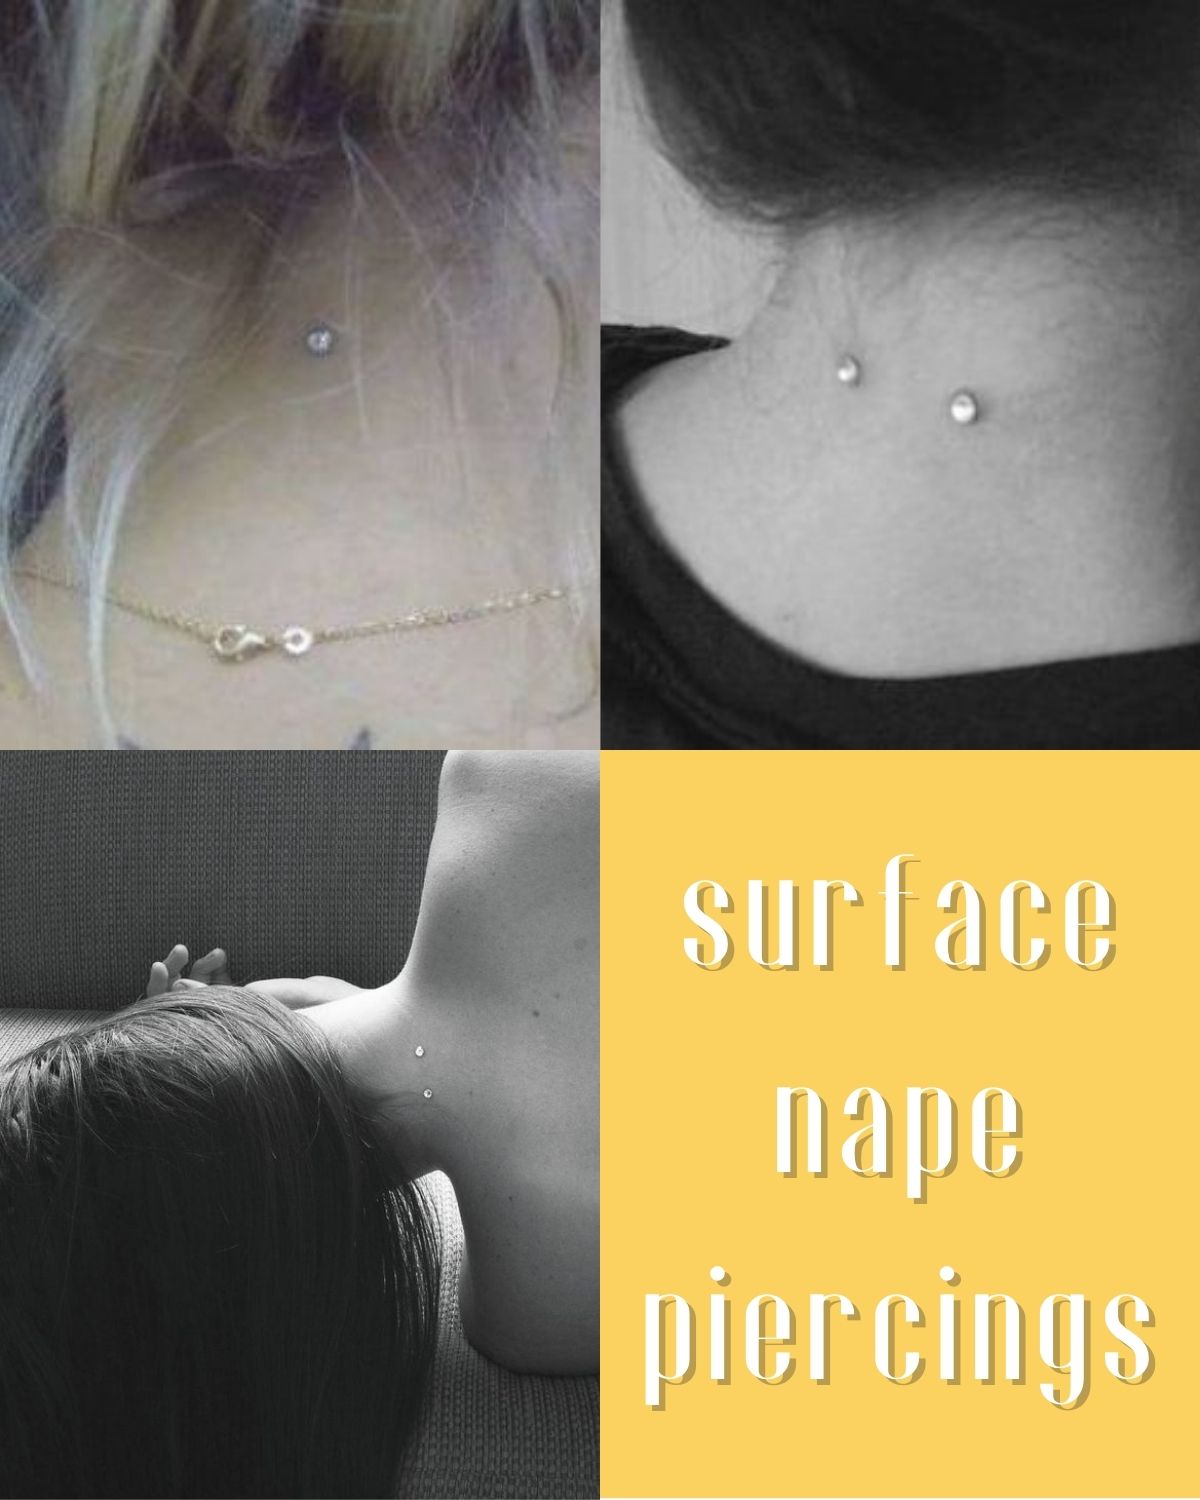 Three girls with surface neck piercings 